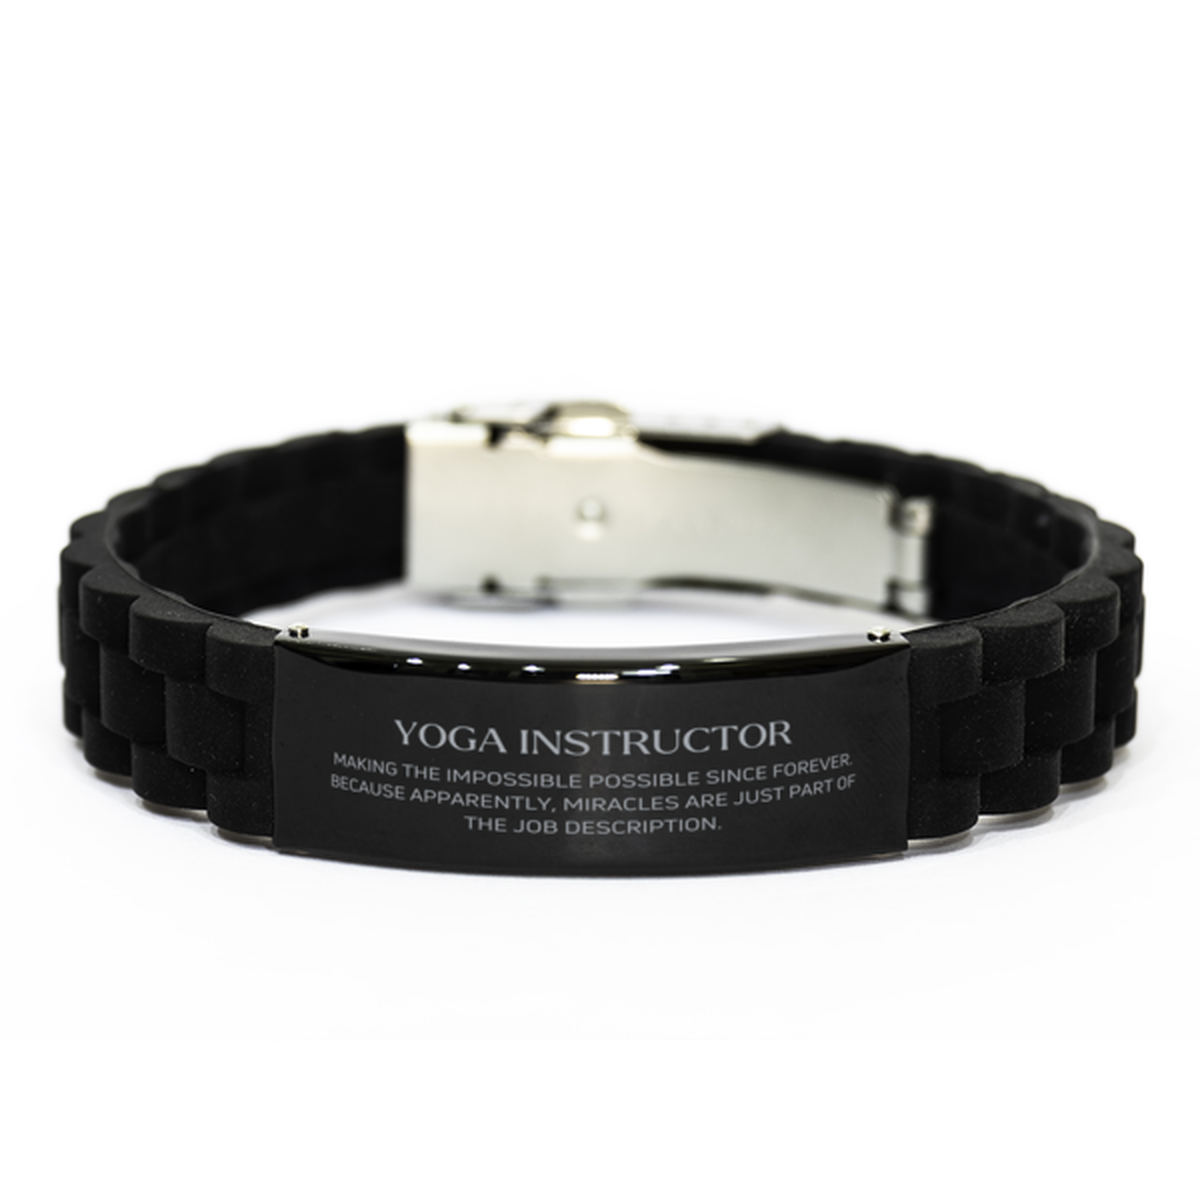 Funny Yoga Instructor Gifts, Miracles are just part of the job description, Inspirational Birthday Black Glidelock Clasp Bracelet For Yoga Instructor, Men, Women, Coworkers, Friends, Boss